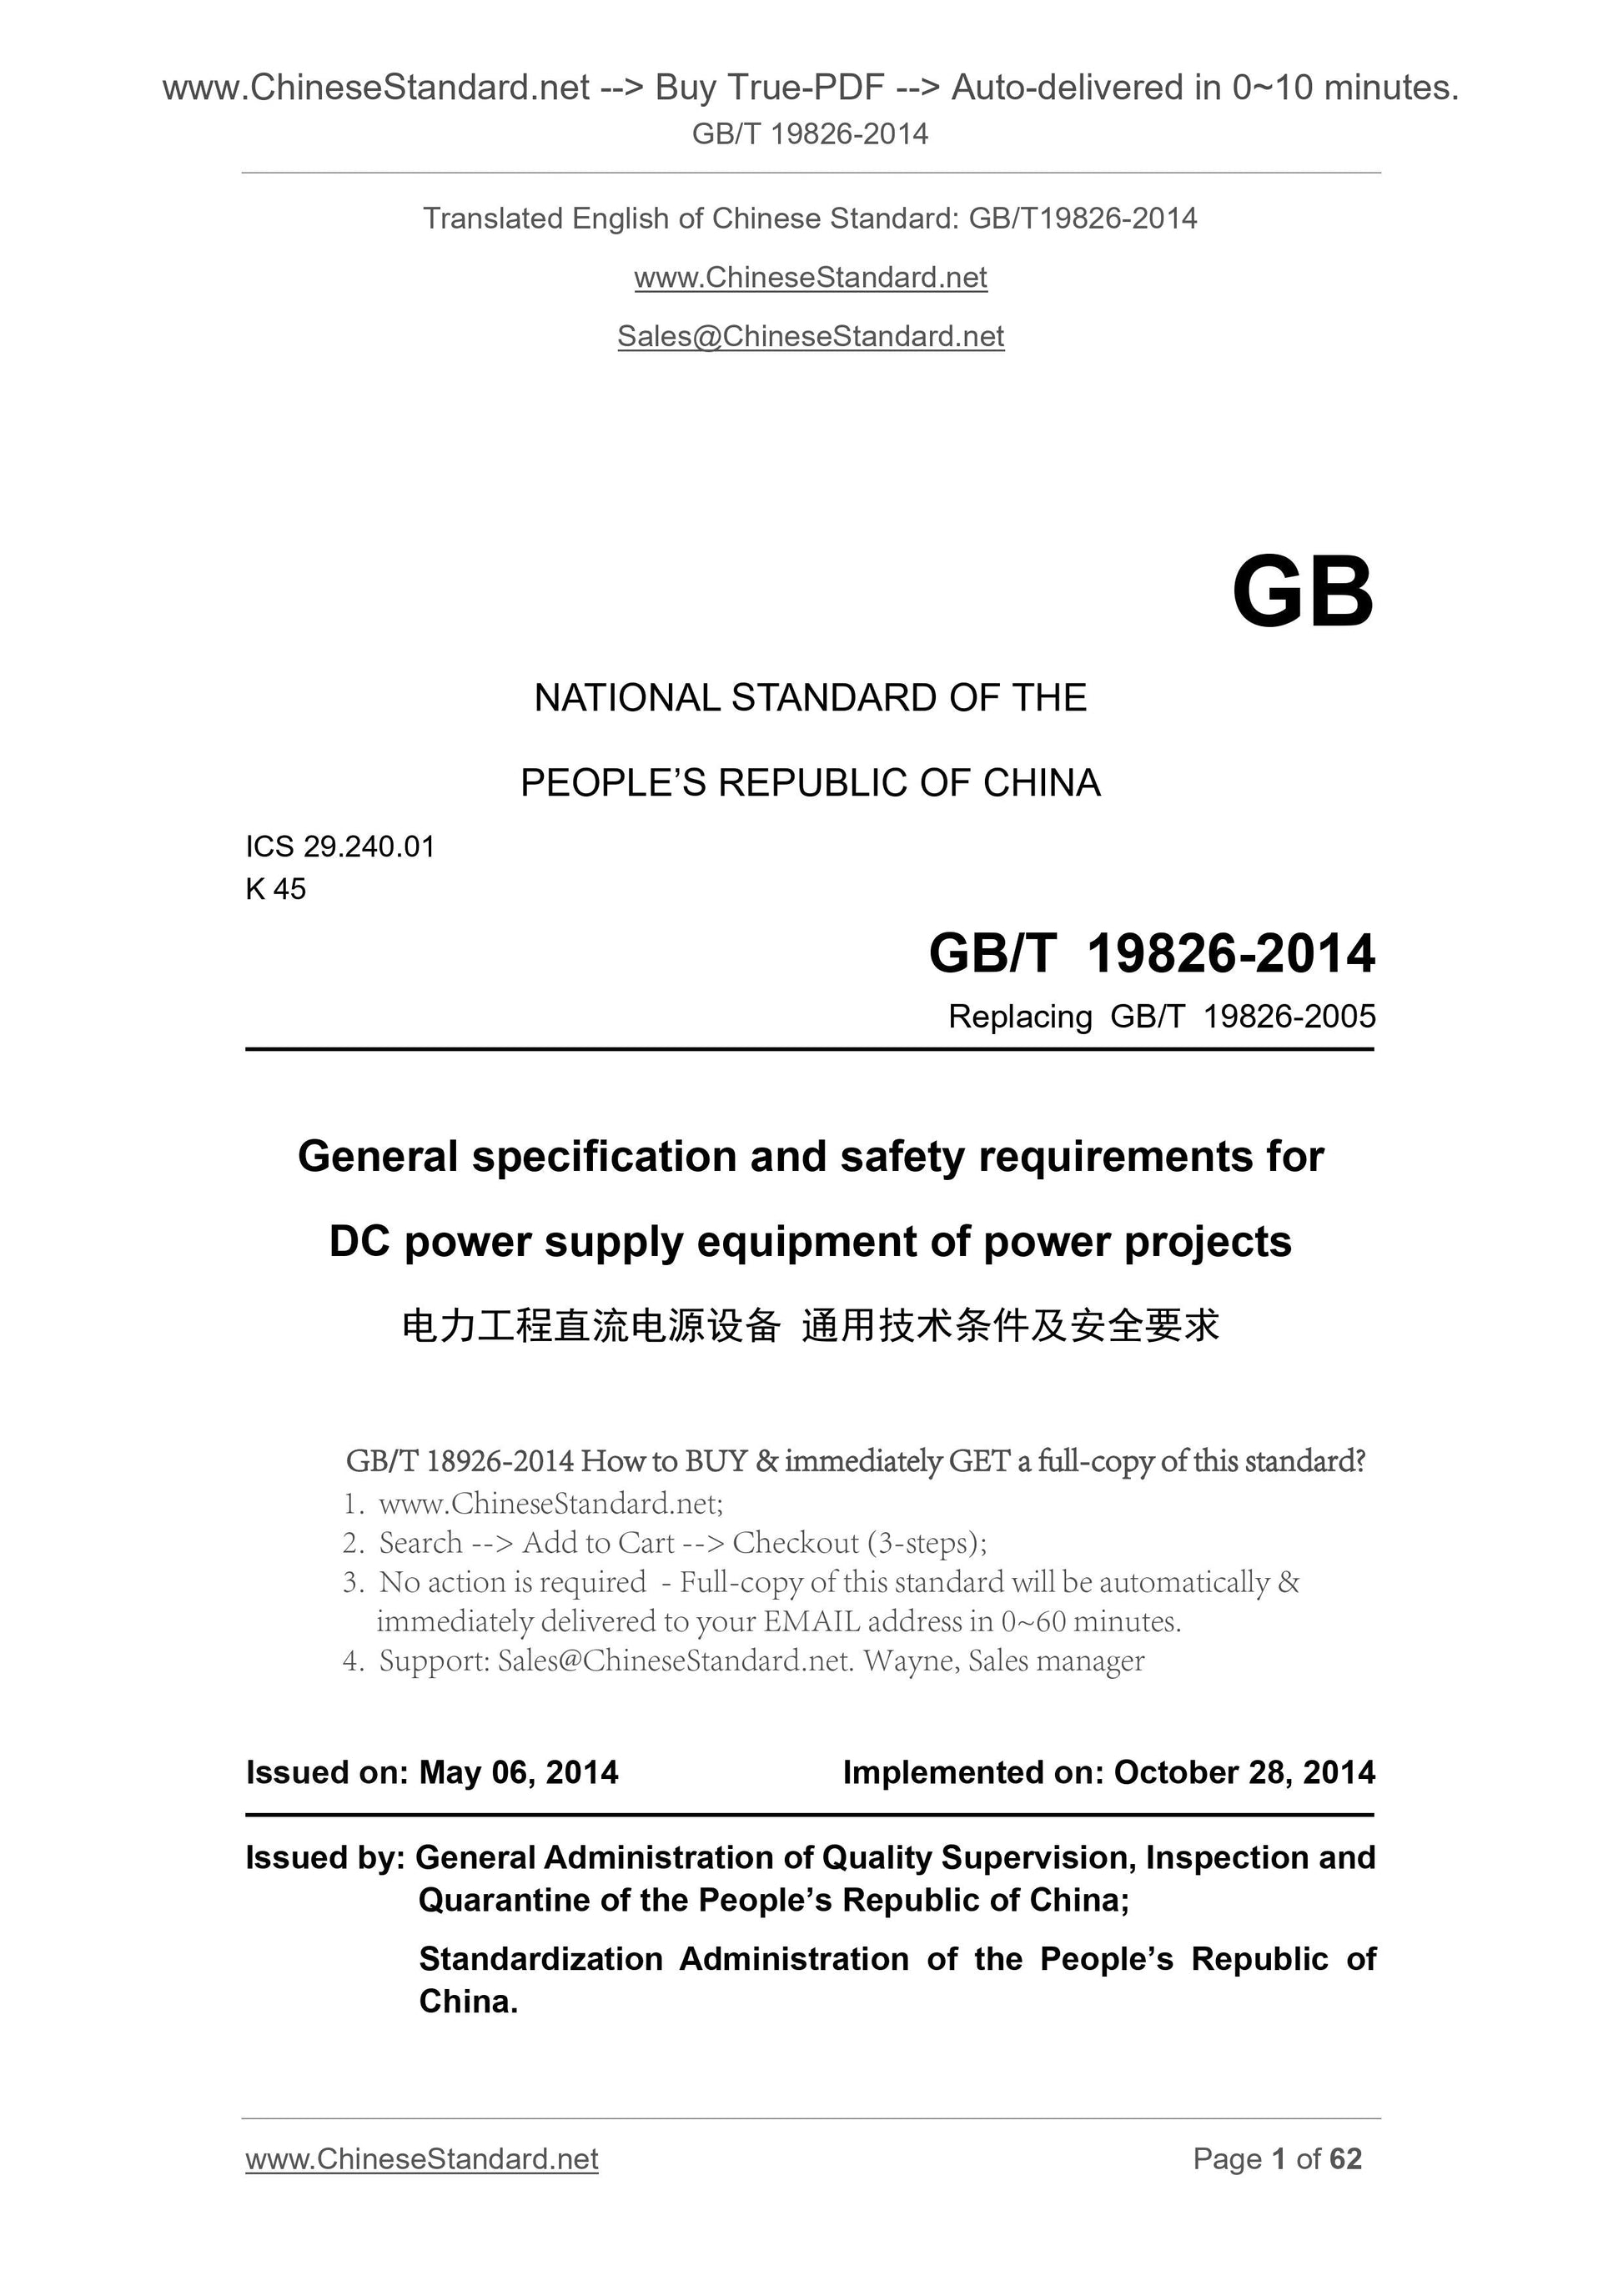 GB/T 19826-2014 Page 1